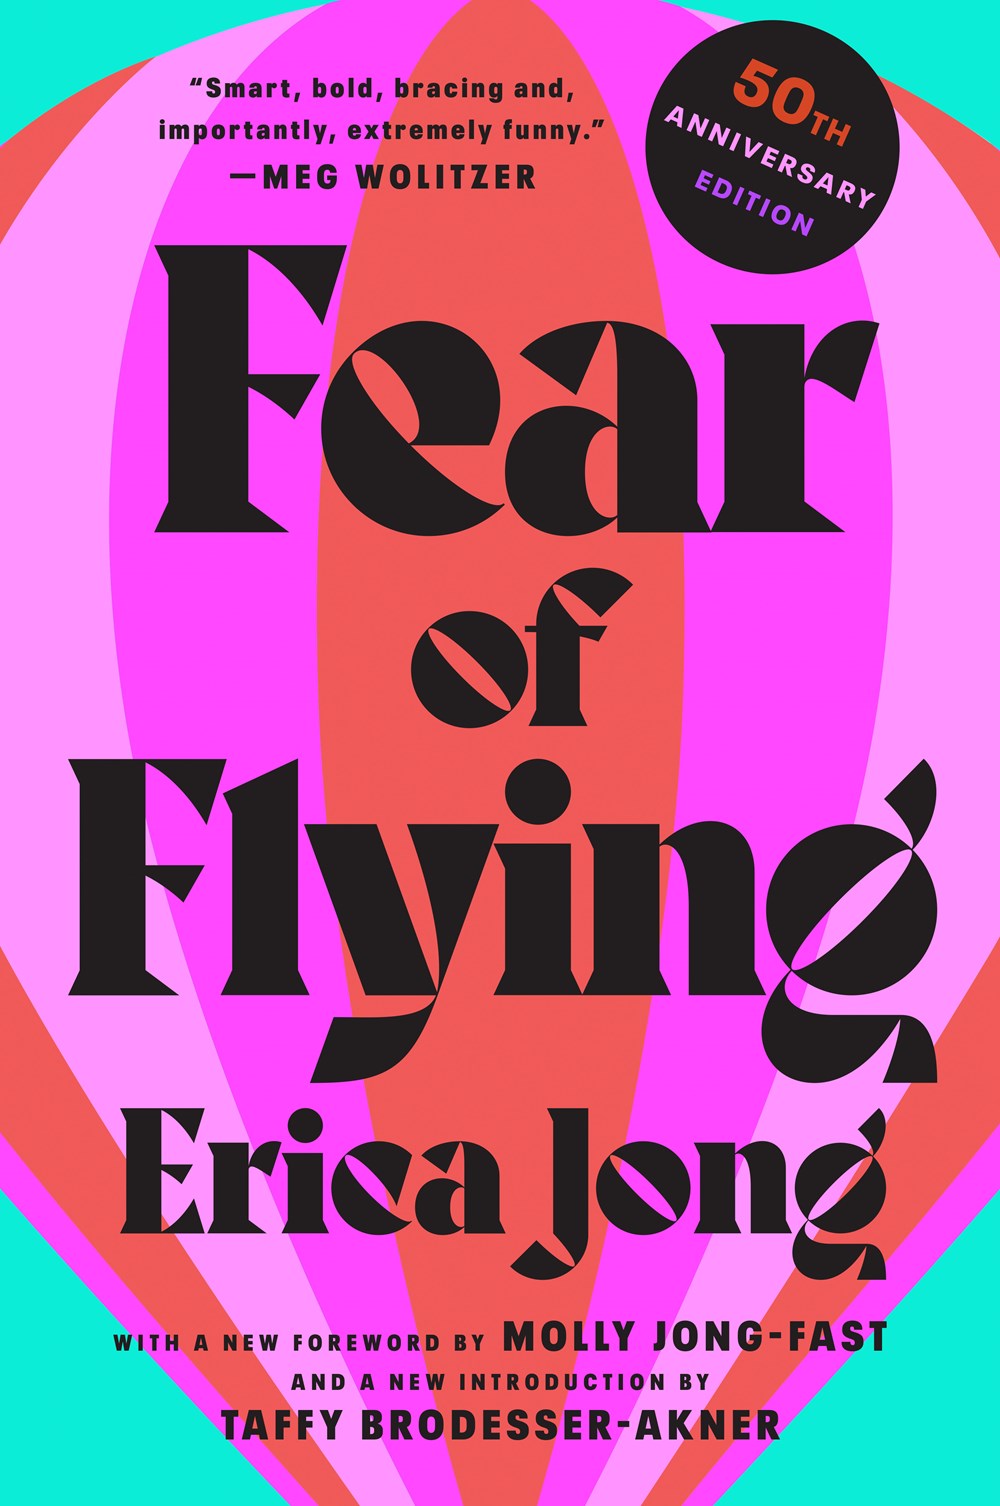 Fear of Flying by Erica Jong (50th Anniversary Edition)